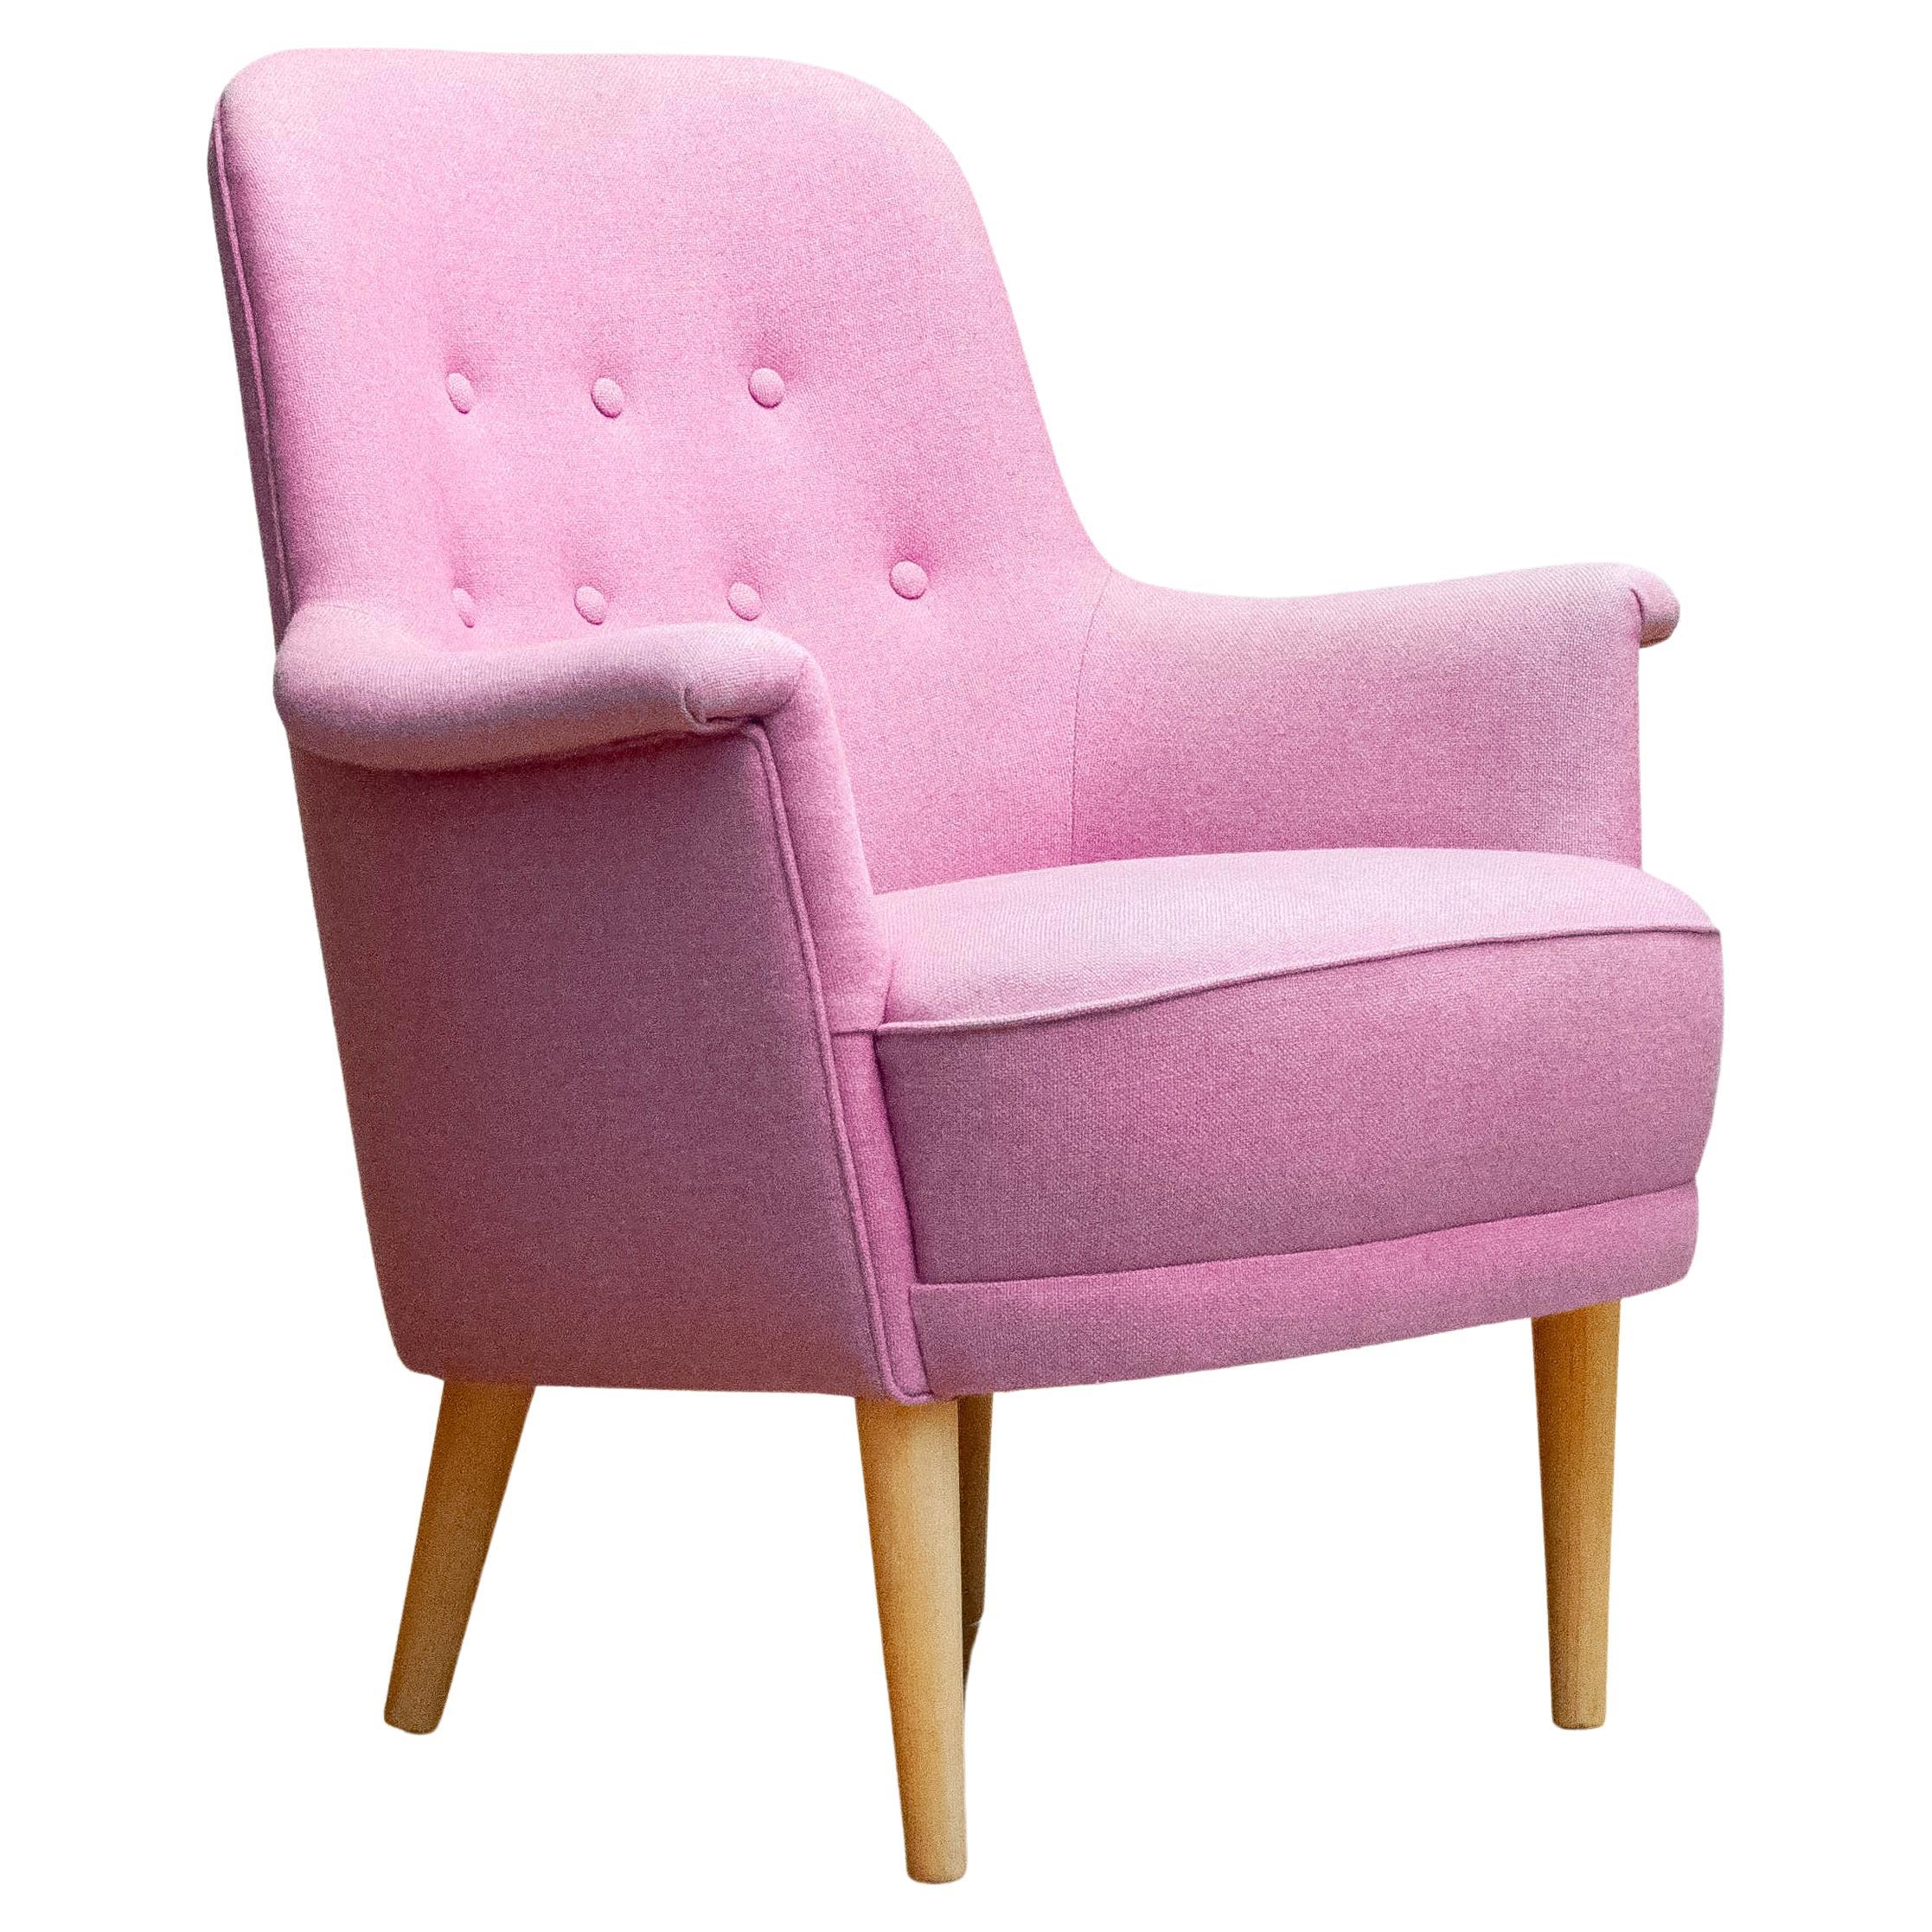 1950s Upholstered With Lilac Wool Armchair By Carl Malmsten For O.H. Sjogren. For Sale